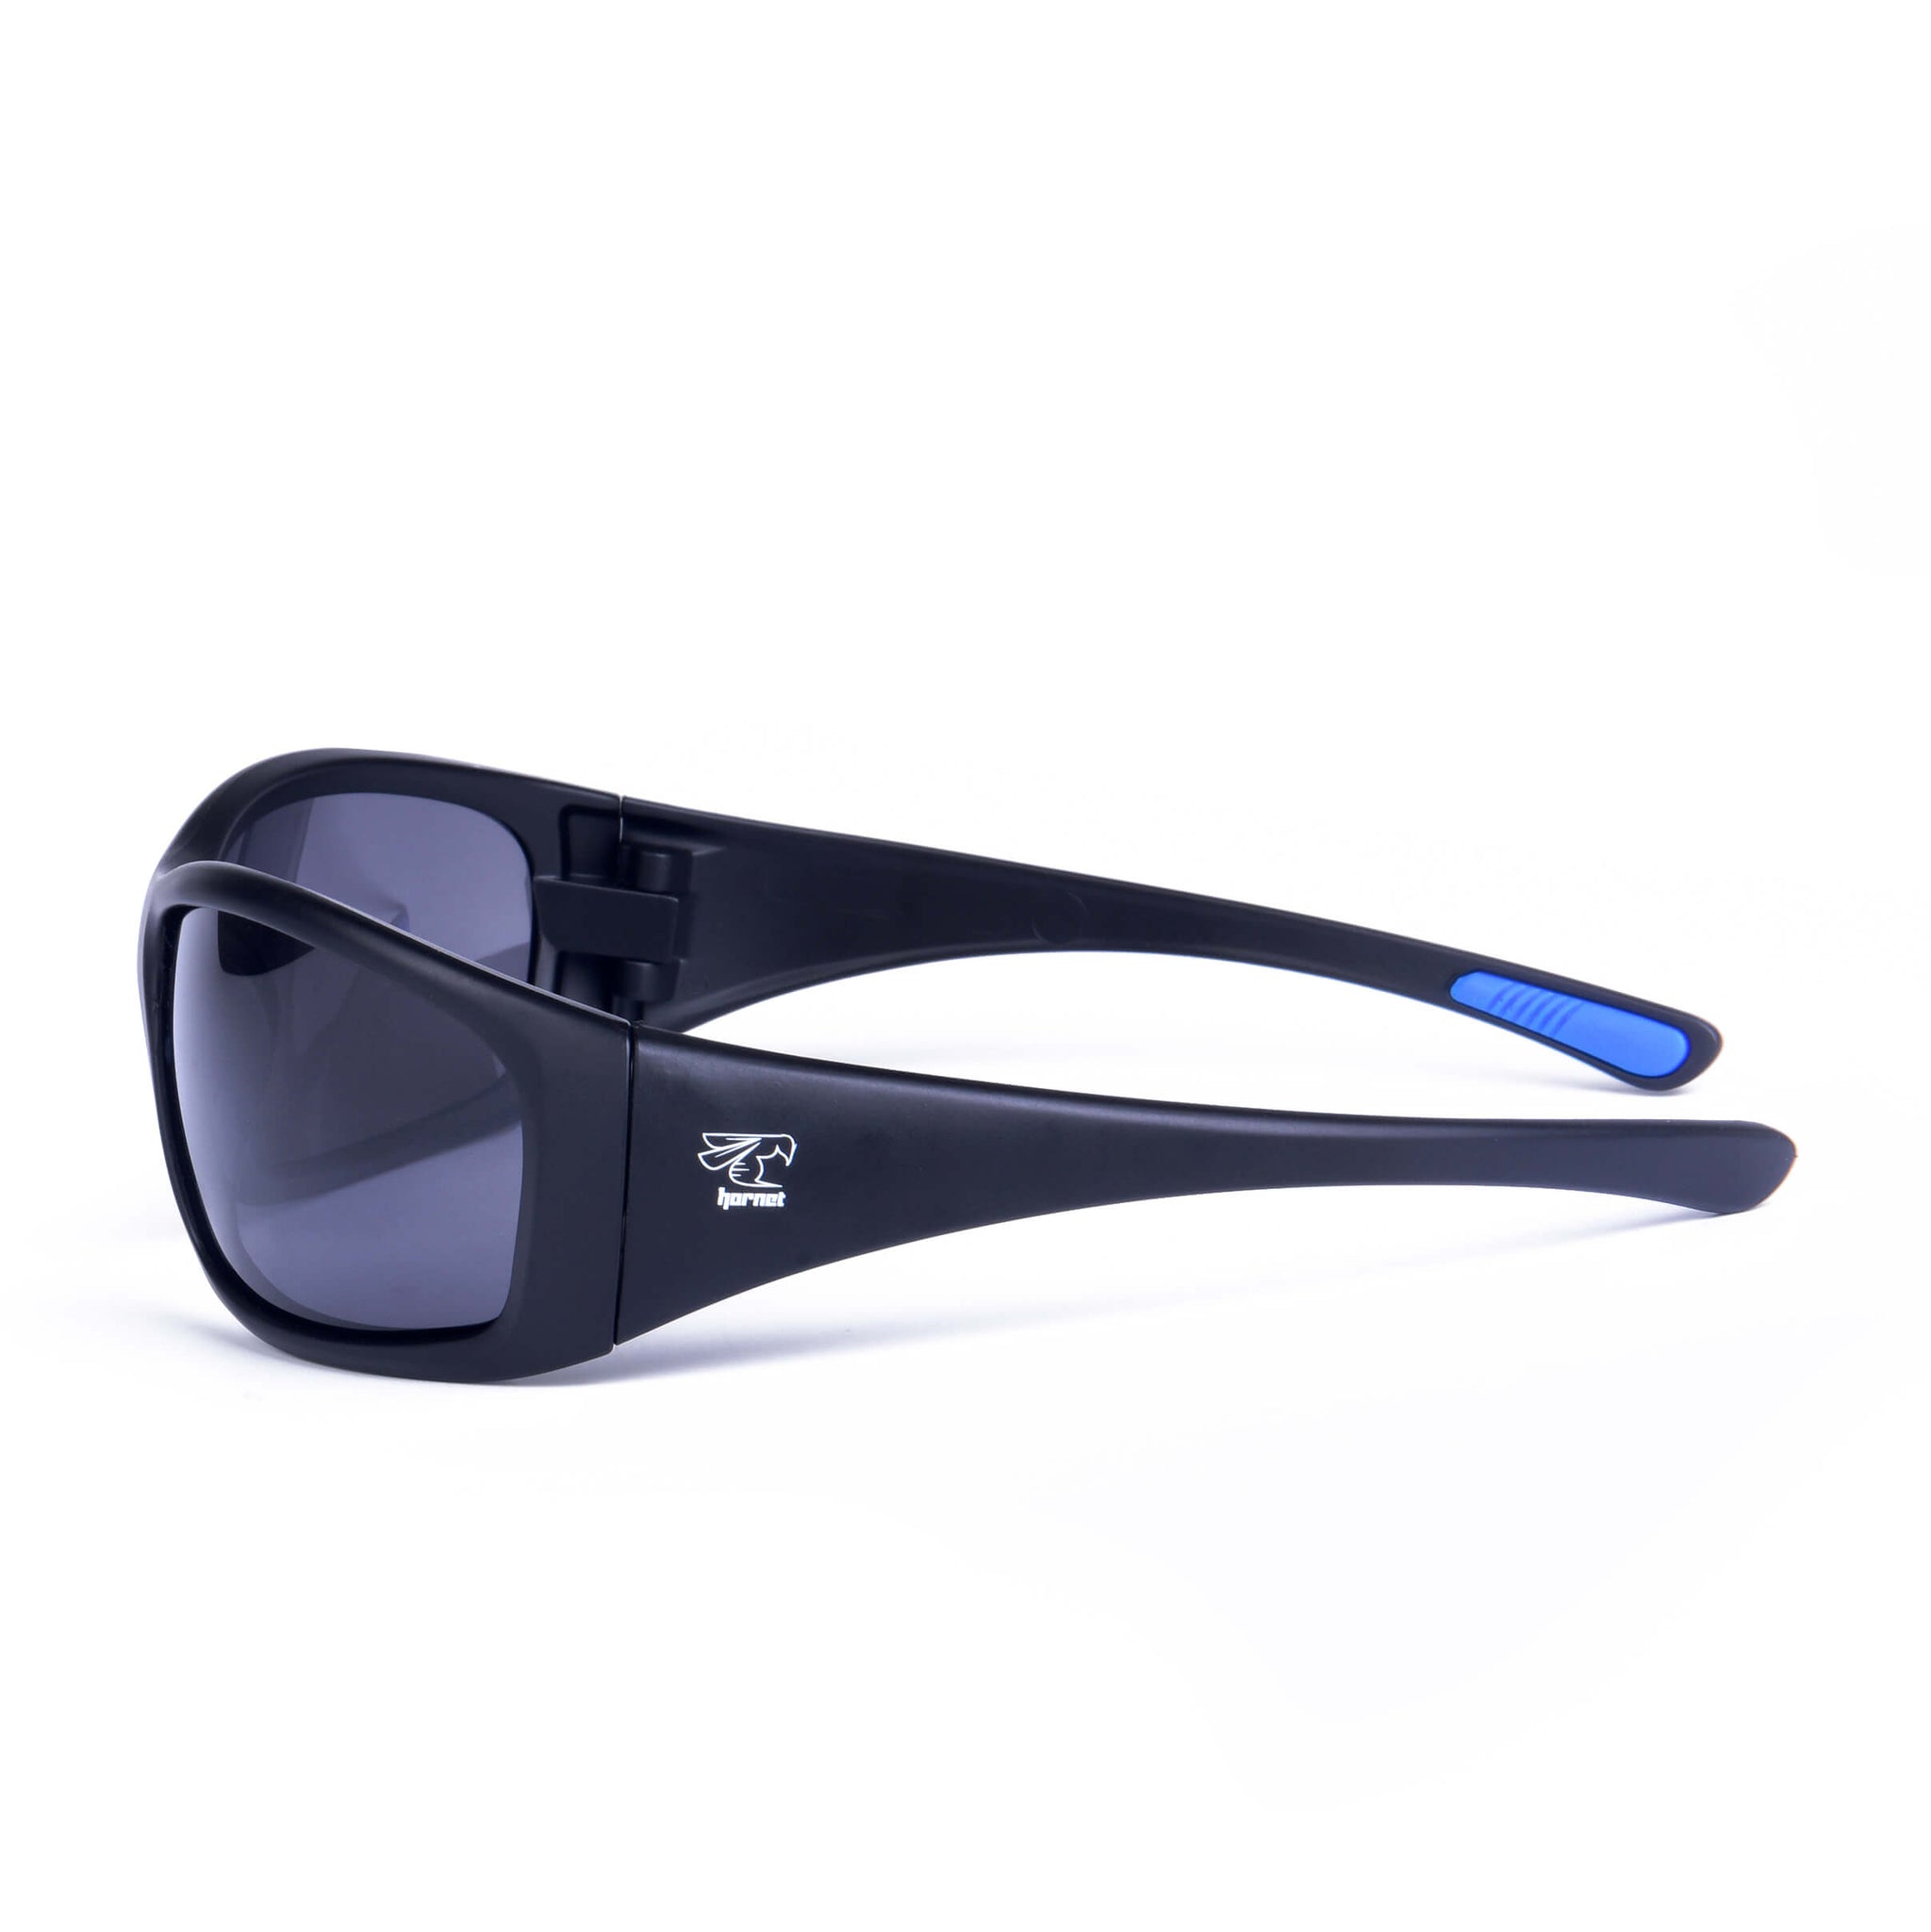 Floating Sunglasses- Polarized Lenses and Floats on Water! – Hornet  Watersports